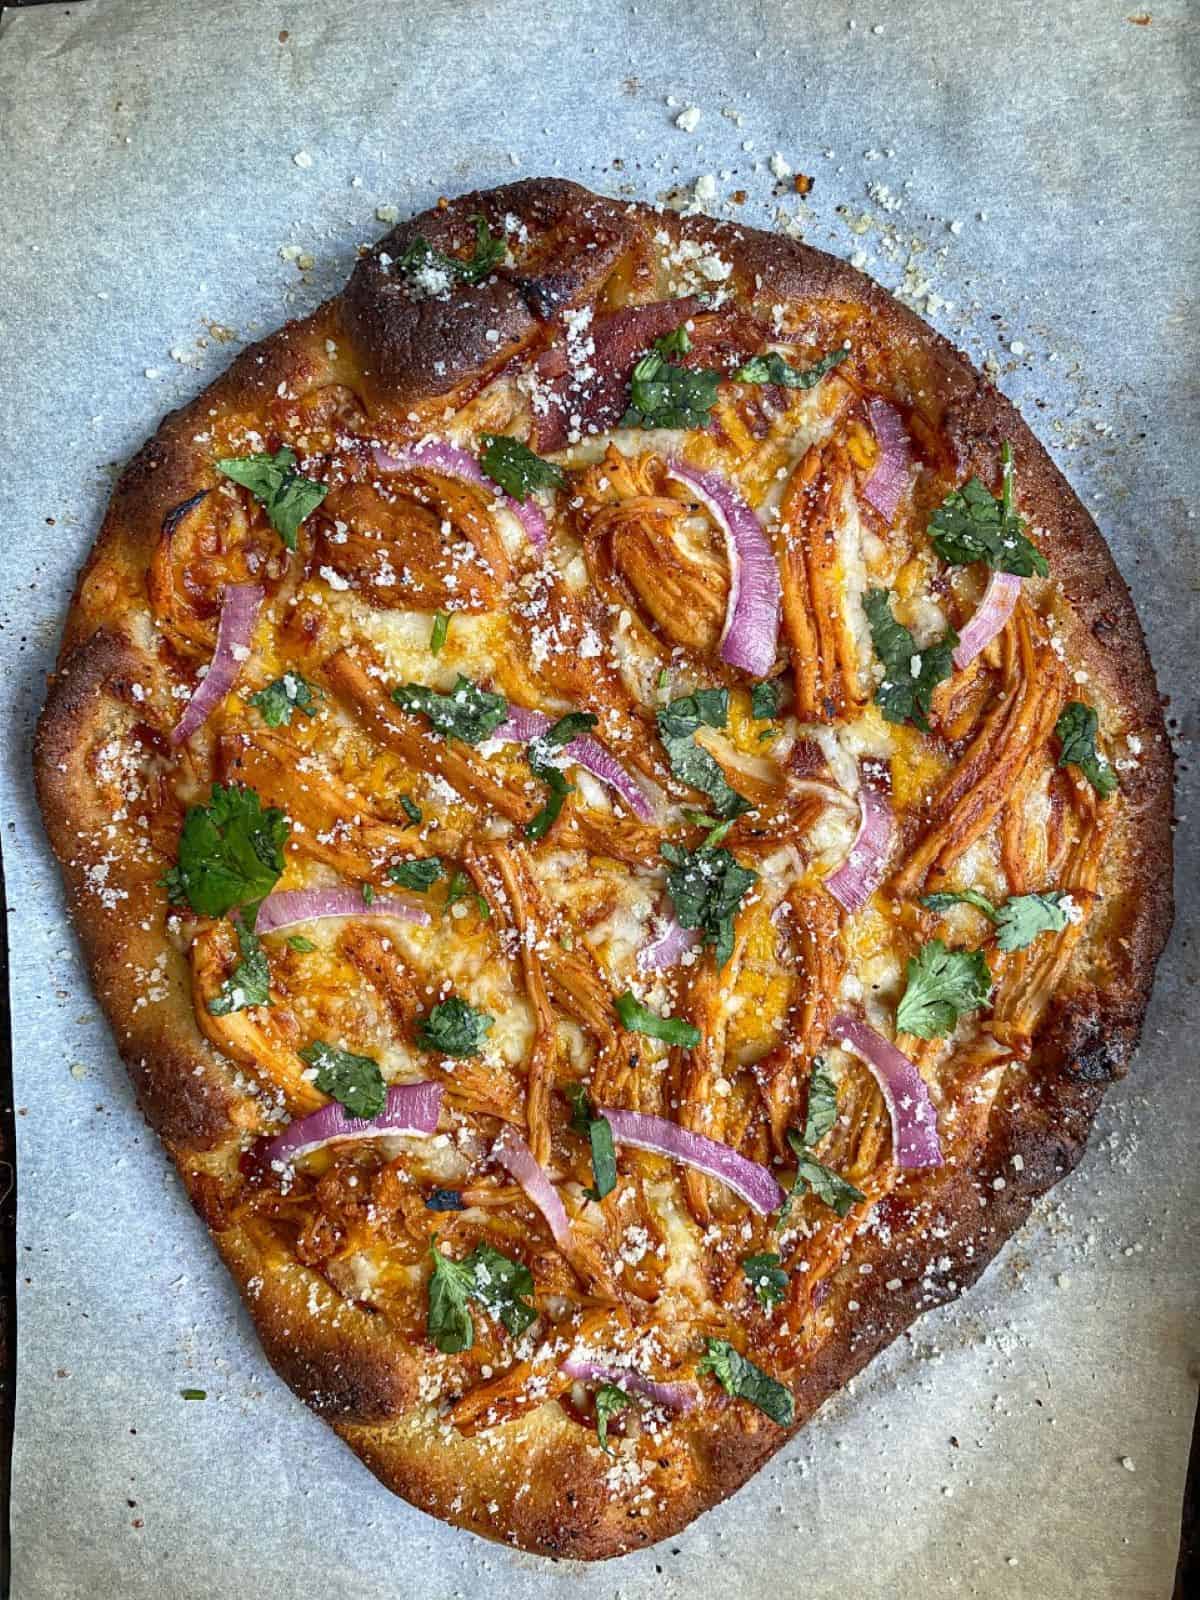 Naan pizza with BBQ chicken, cheese, red onion, and cilantro on parchment paper.